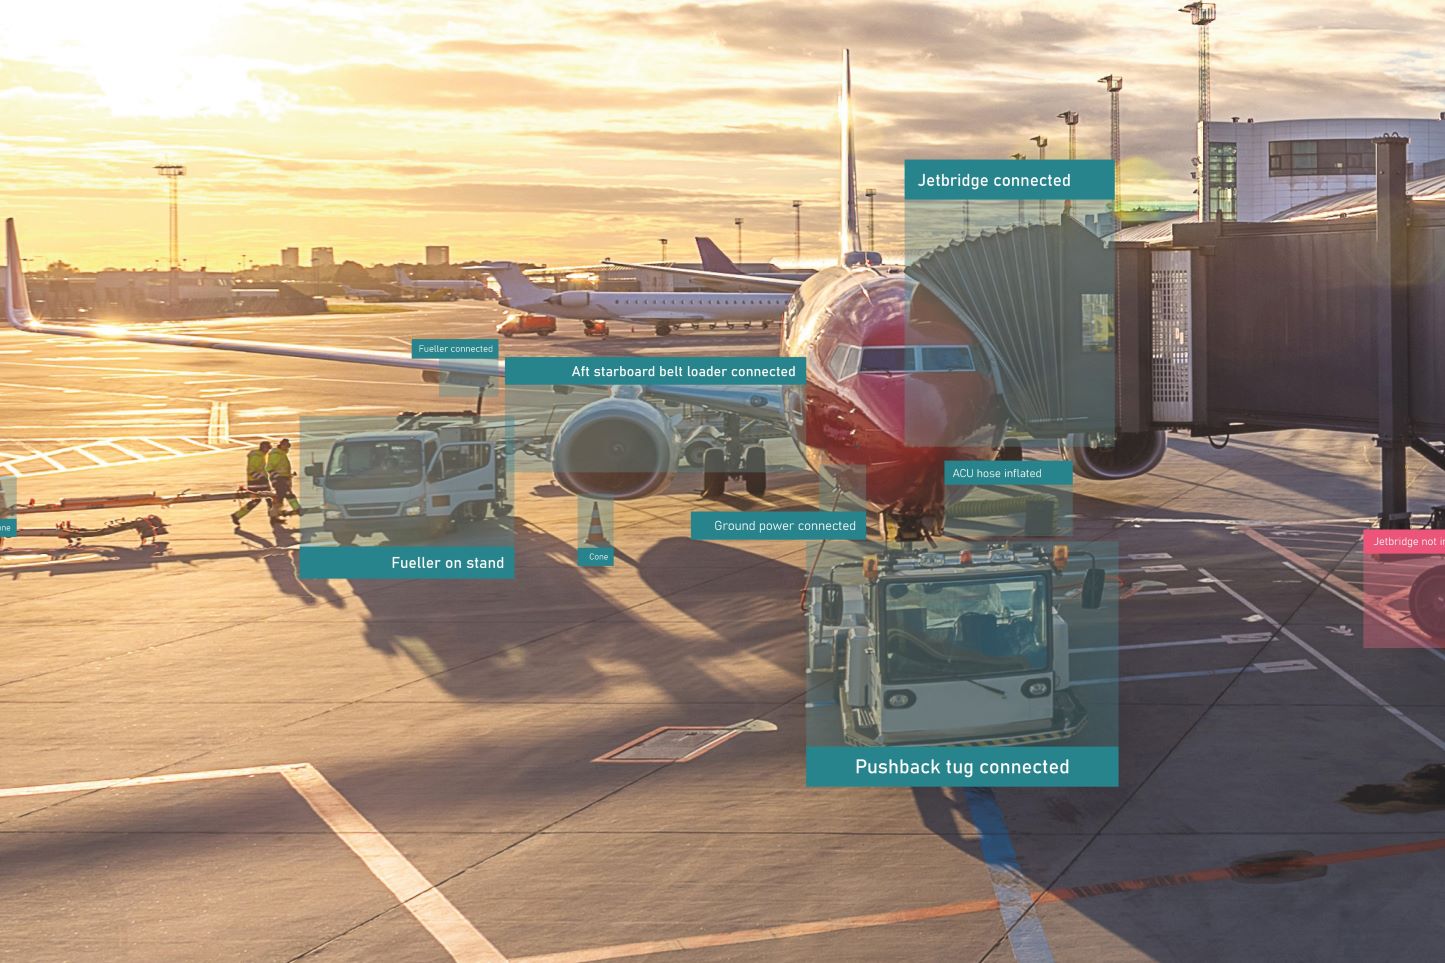 Assaia brings visibility to all turnaround processes, which then translate into fewer delays, greater efficiencies and a more sustainable airport